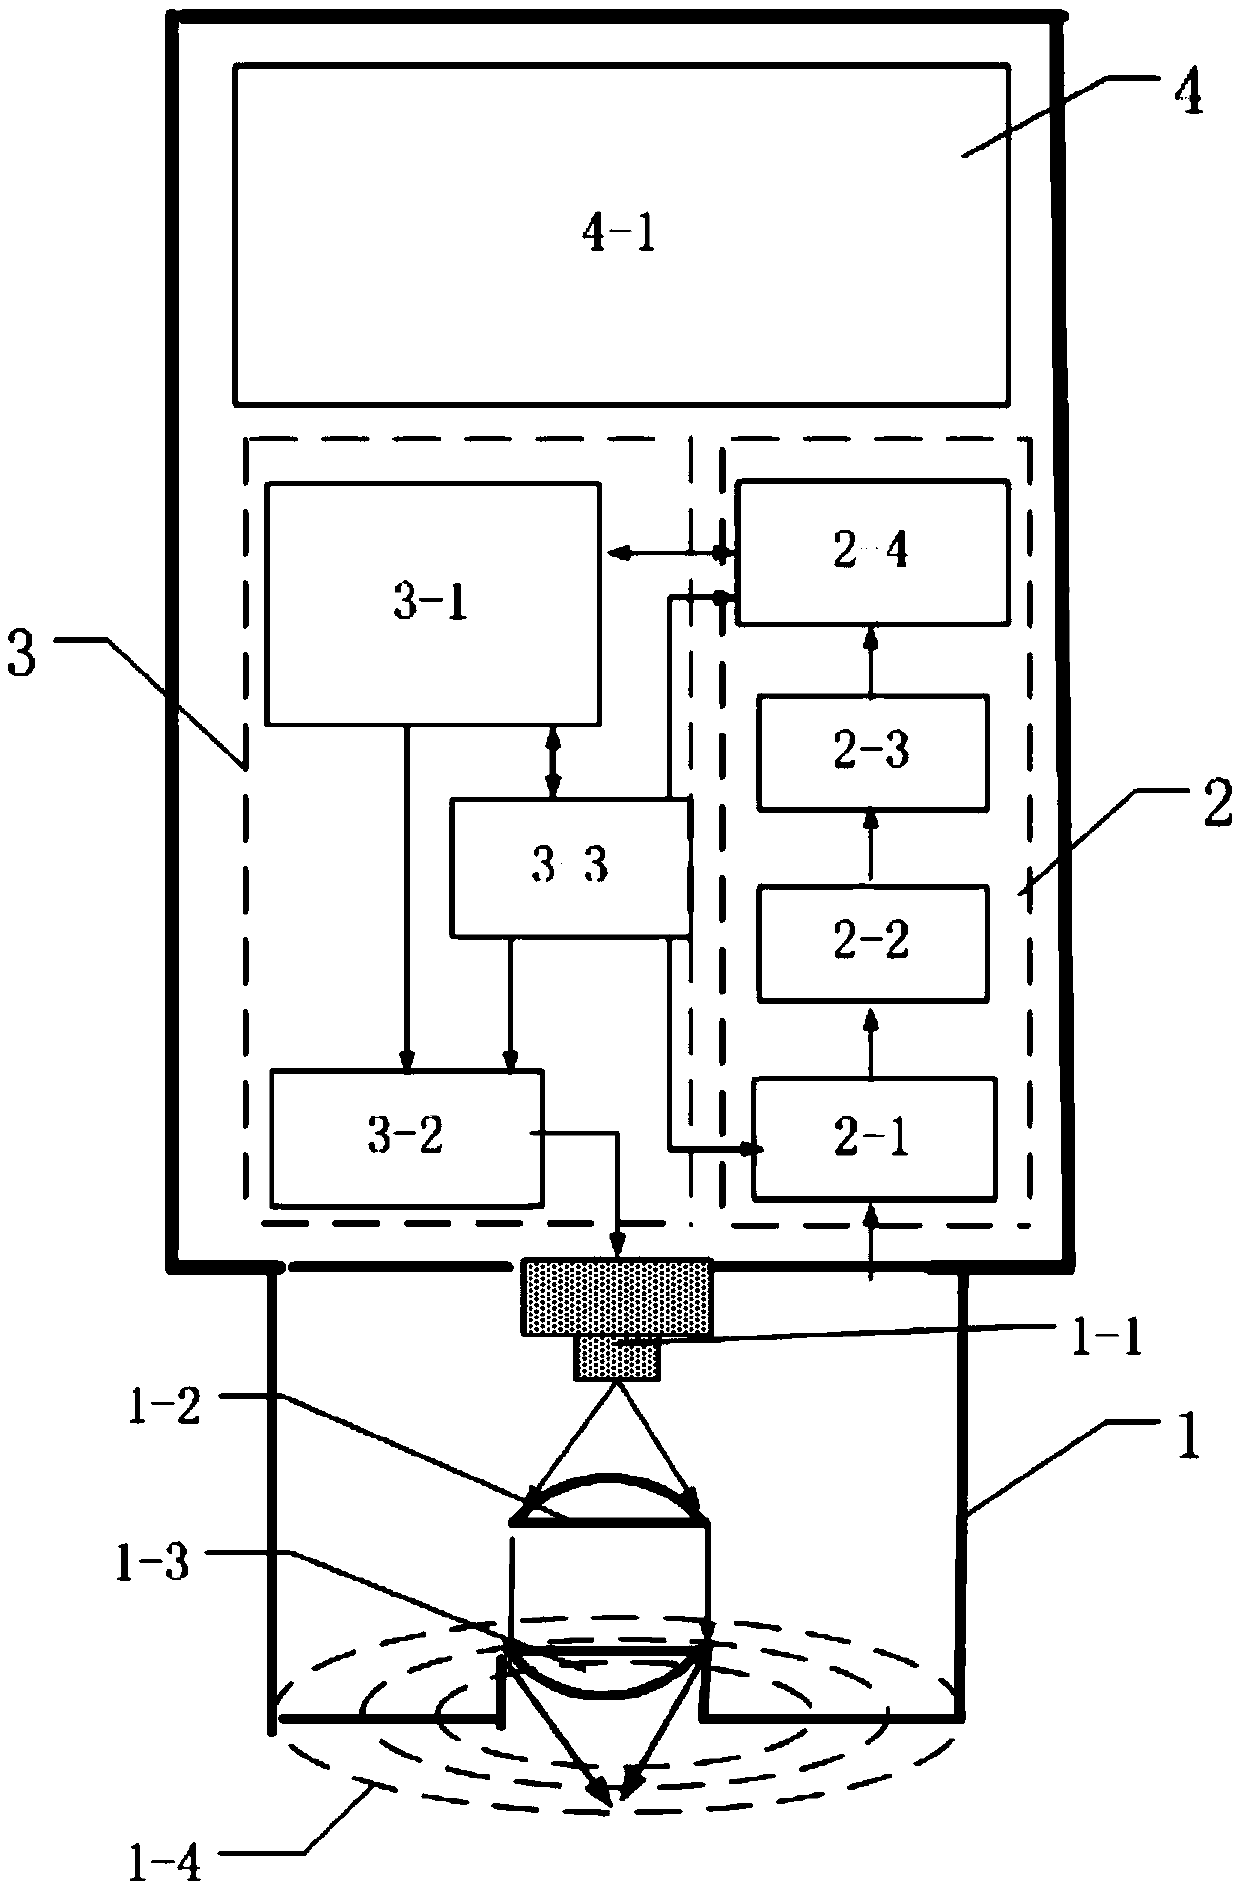 A handheld food safety detection device and method